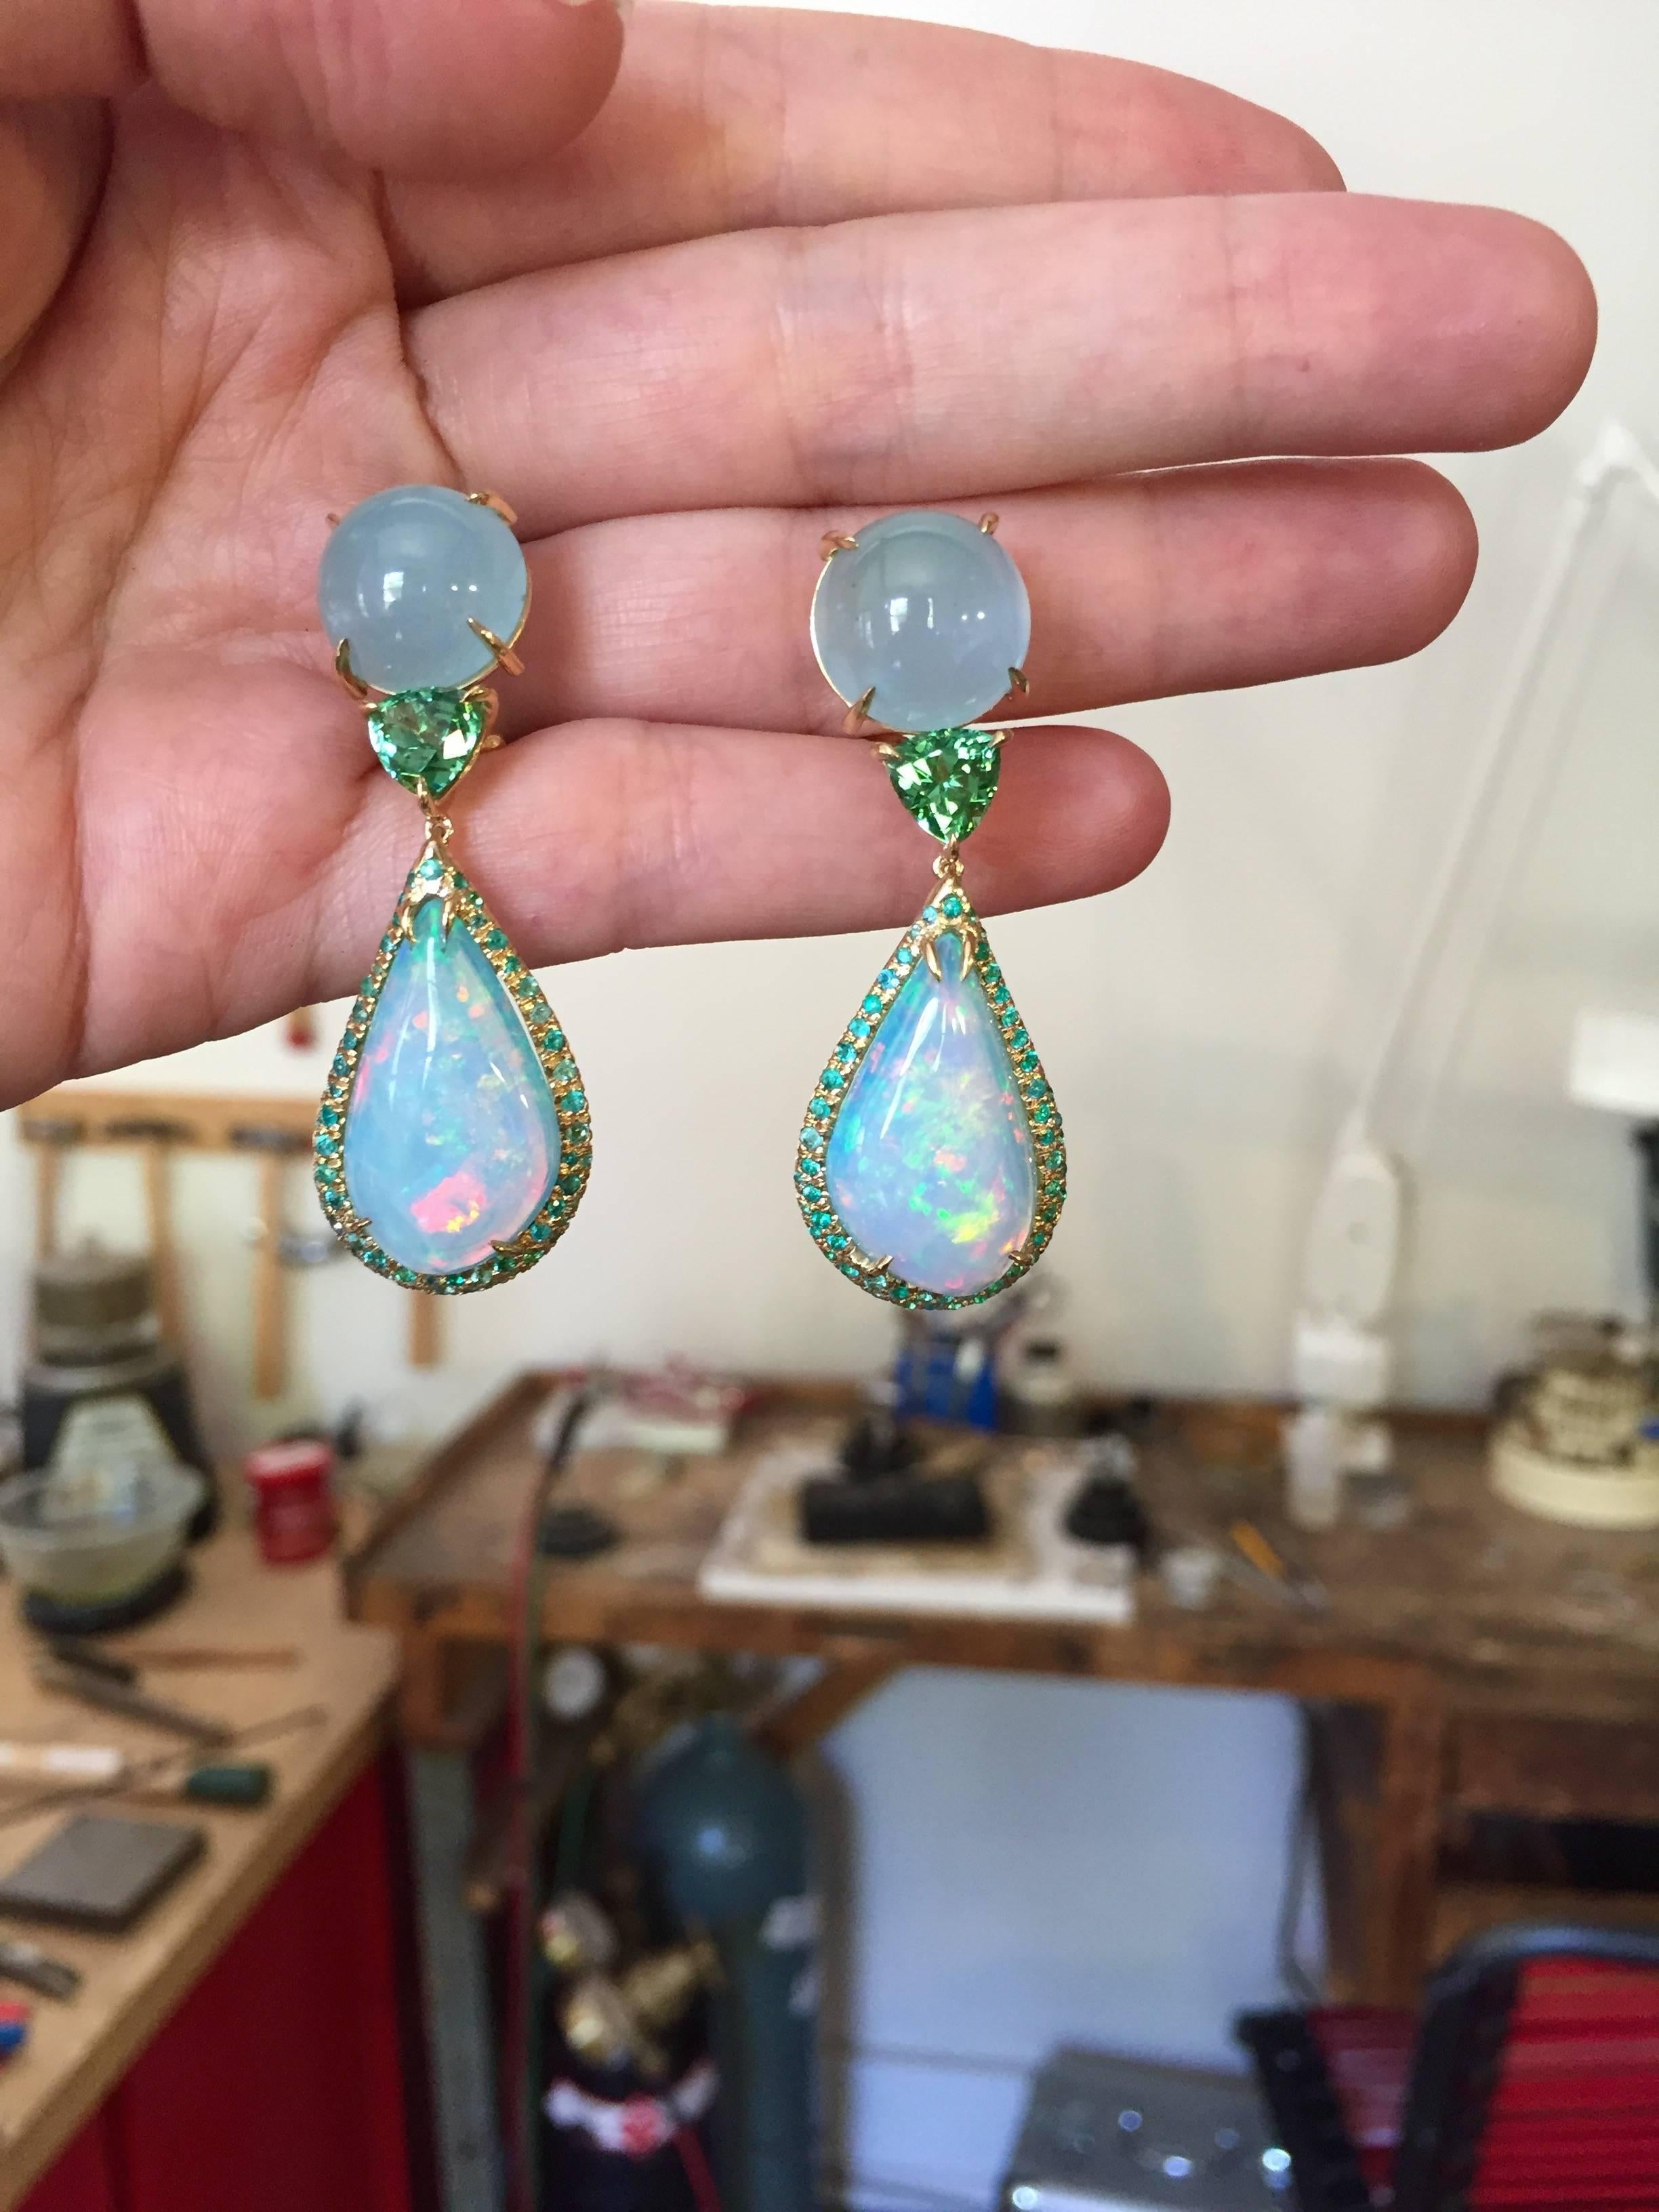 These magnificent earrings will turn every head in the room. Luminous aquamarine cabochons and faceted mint green tourmaline trillions from Mozambique suspend once-in-a-lifetime, semi-translucent, fiery Mexican blue opals surrounded by a medley of